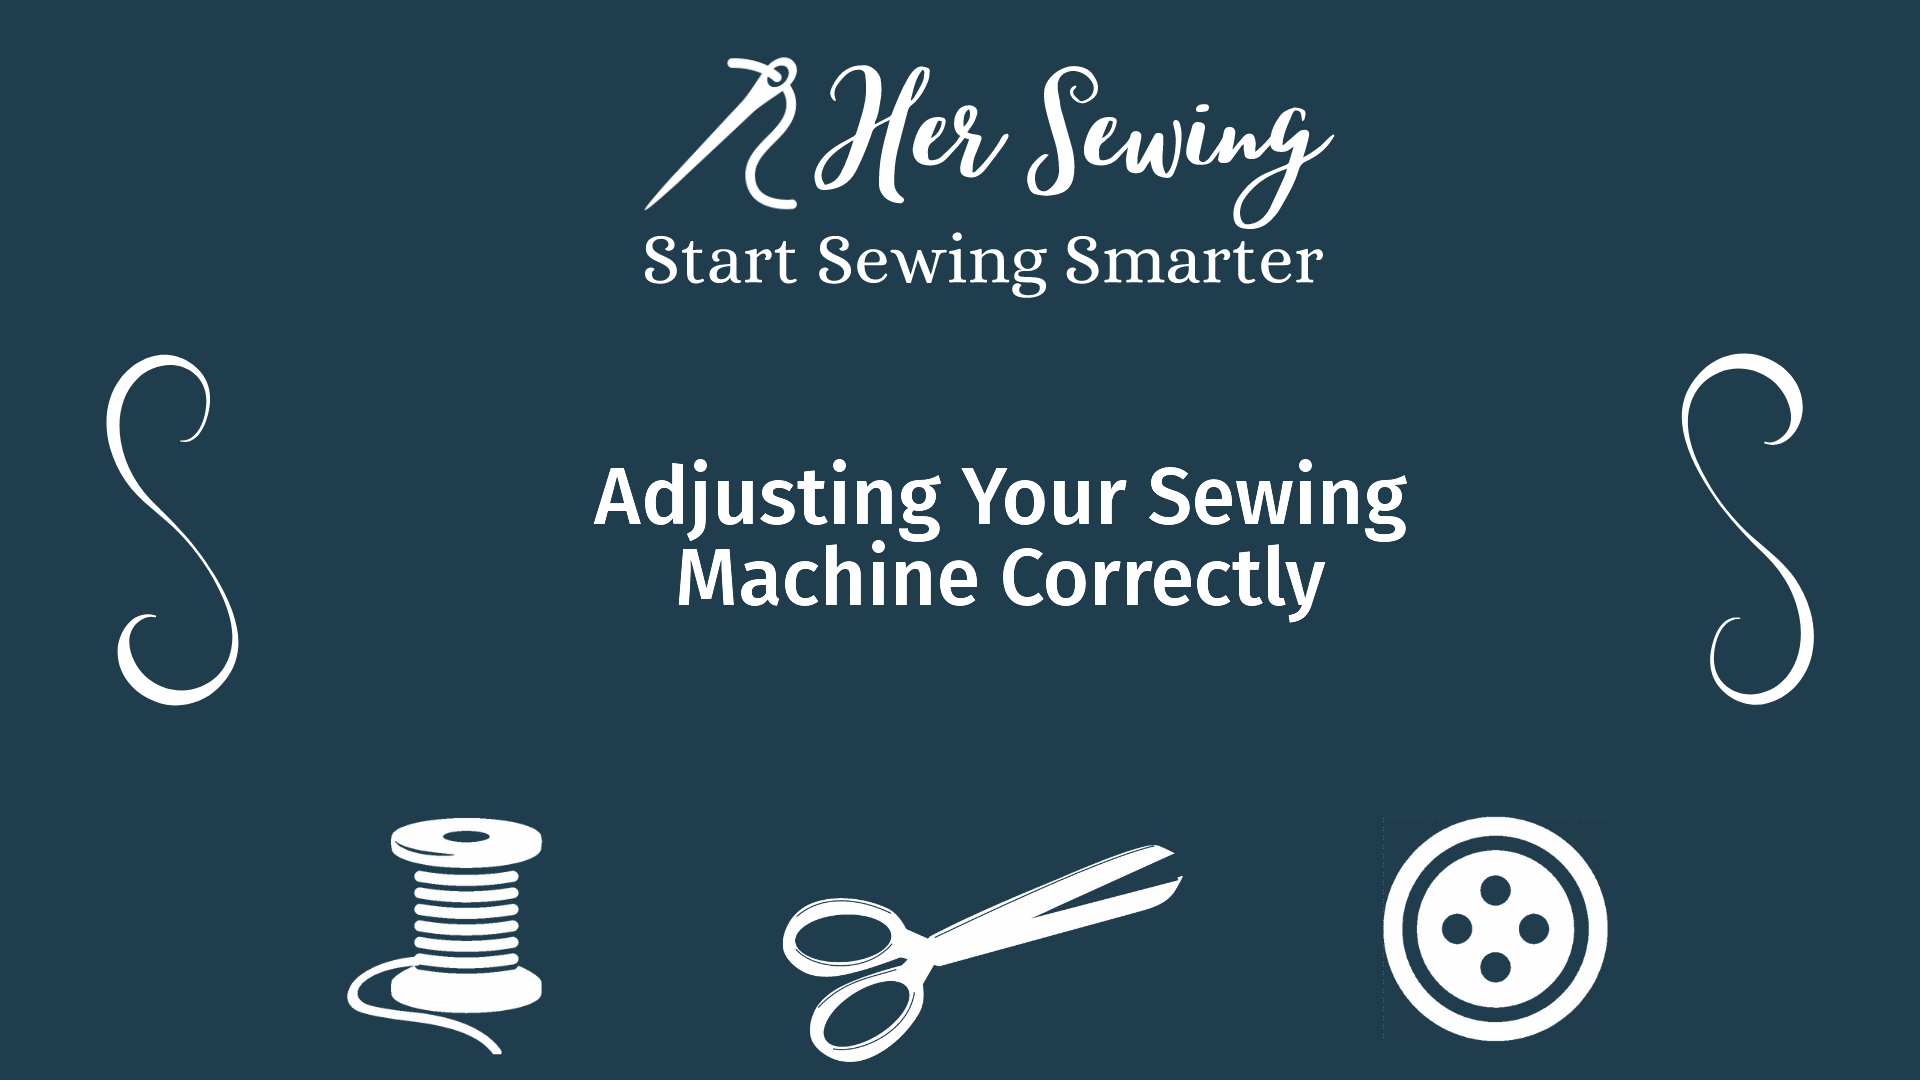 Adjusting Your Sewing Machine Correctly